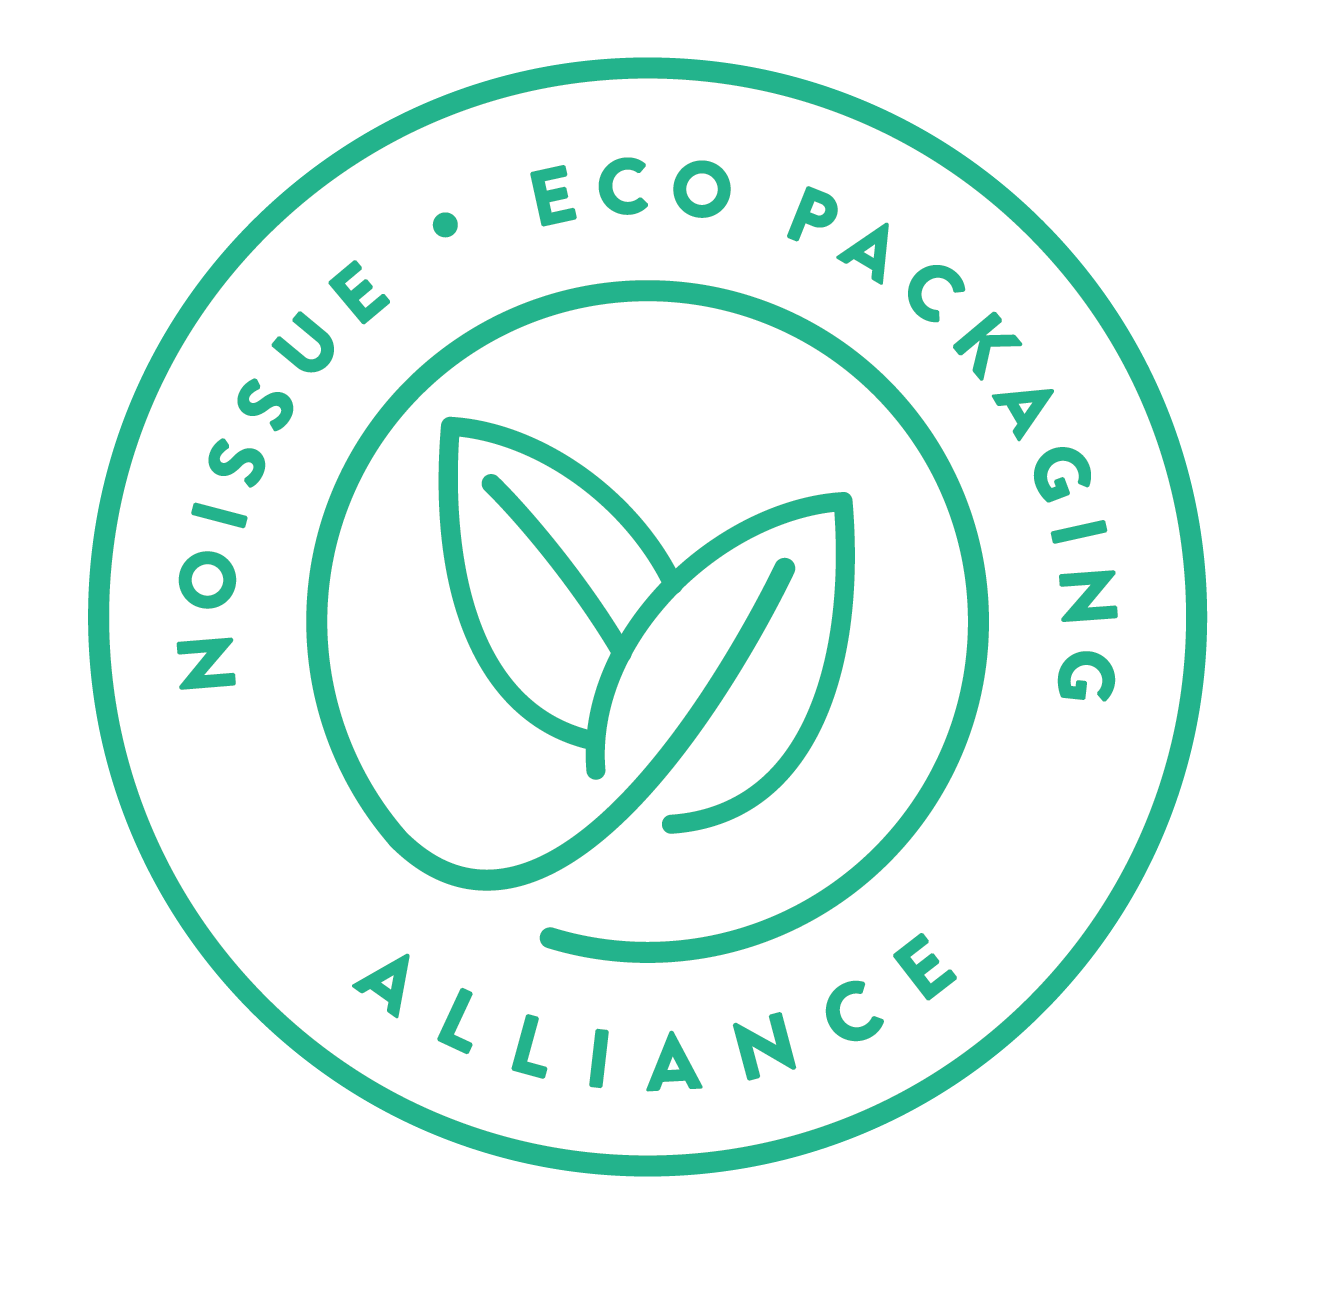 NoIssue Eco Packaging Alliance | Sustainable Packaging (Copy) (Copy) (Copy) (Copy) (Copy)